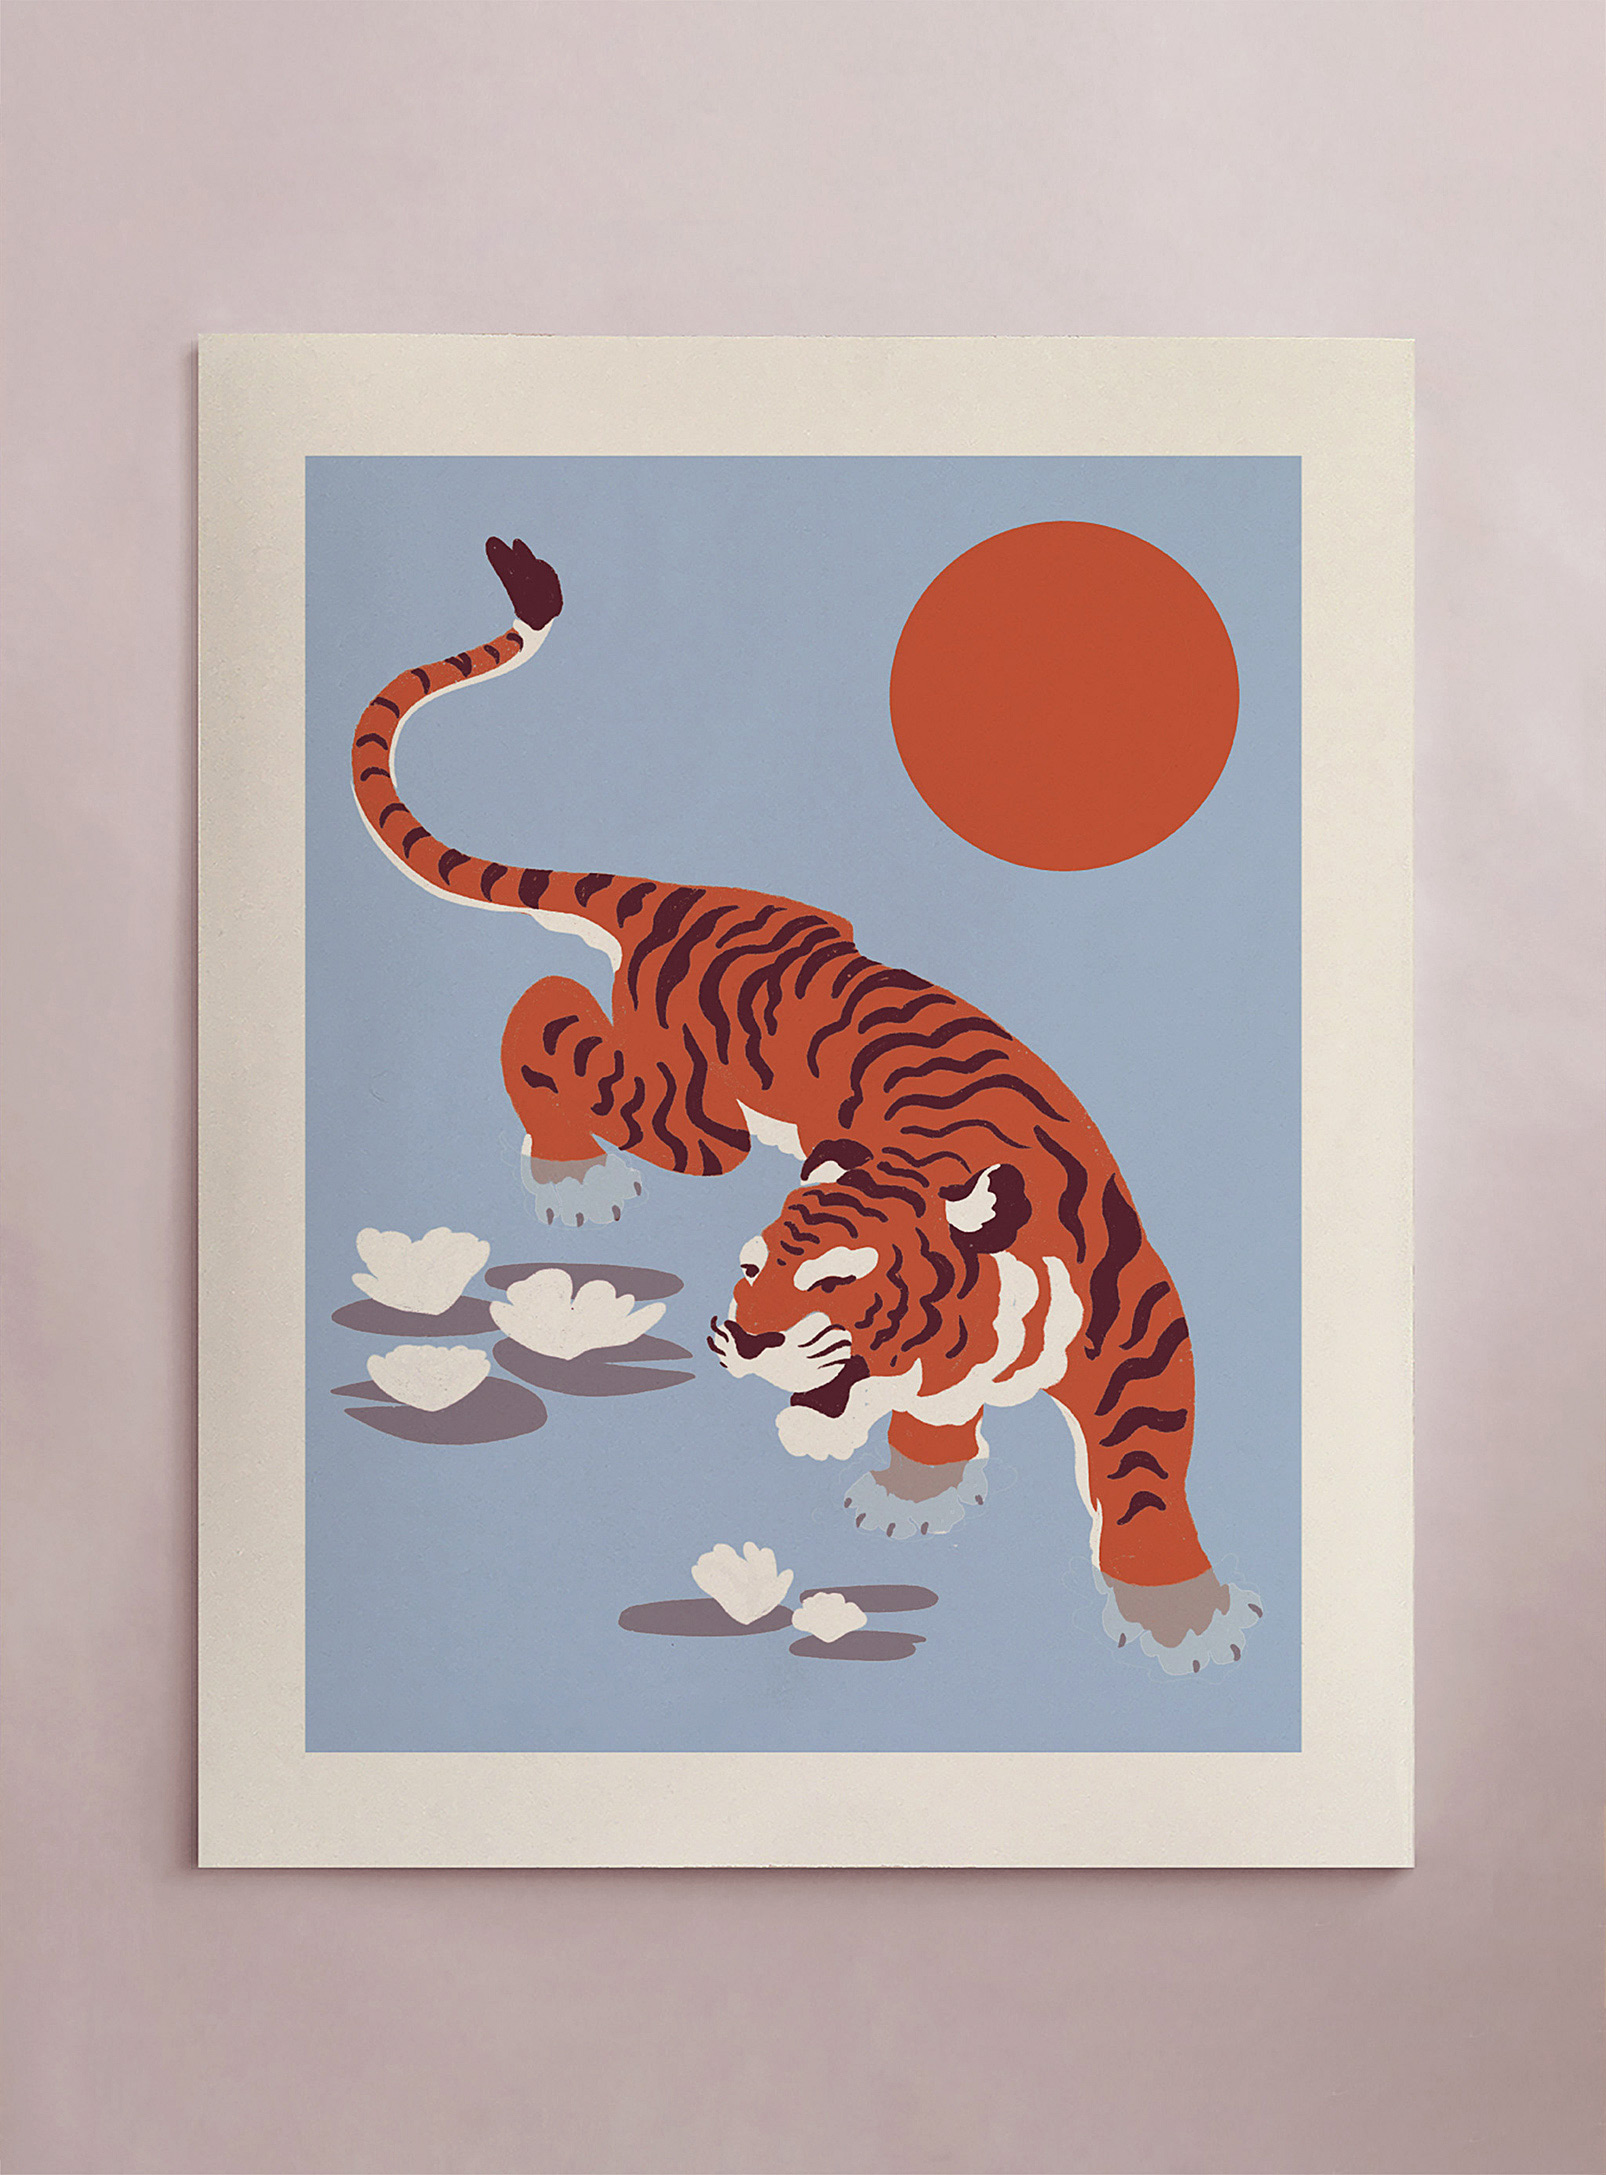 Stephanie Cheng - Water Tiger print 16 x 20 in